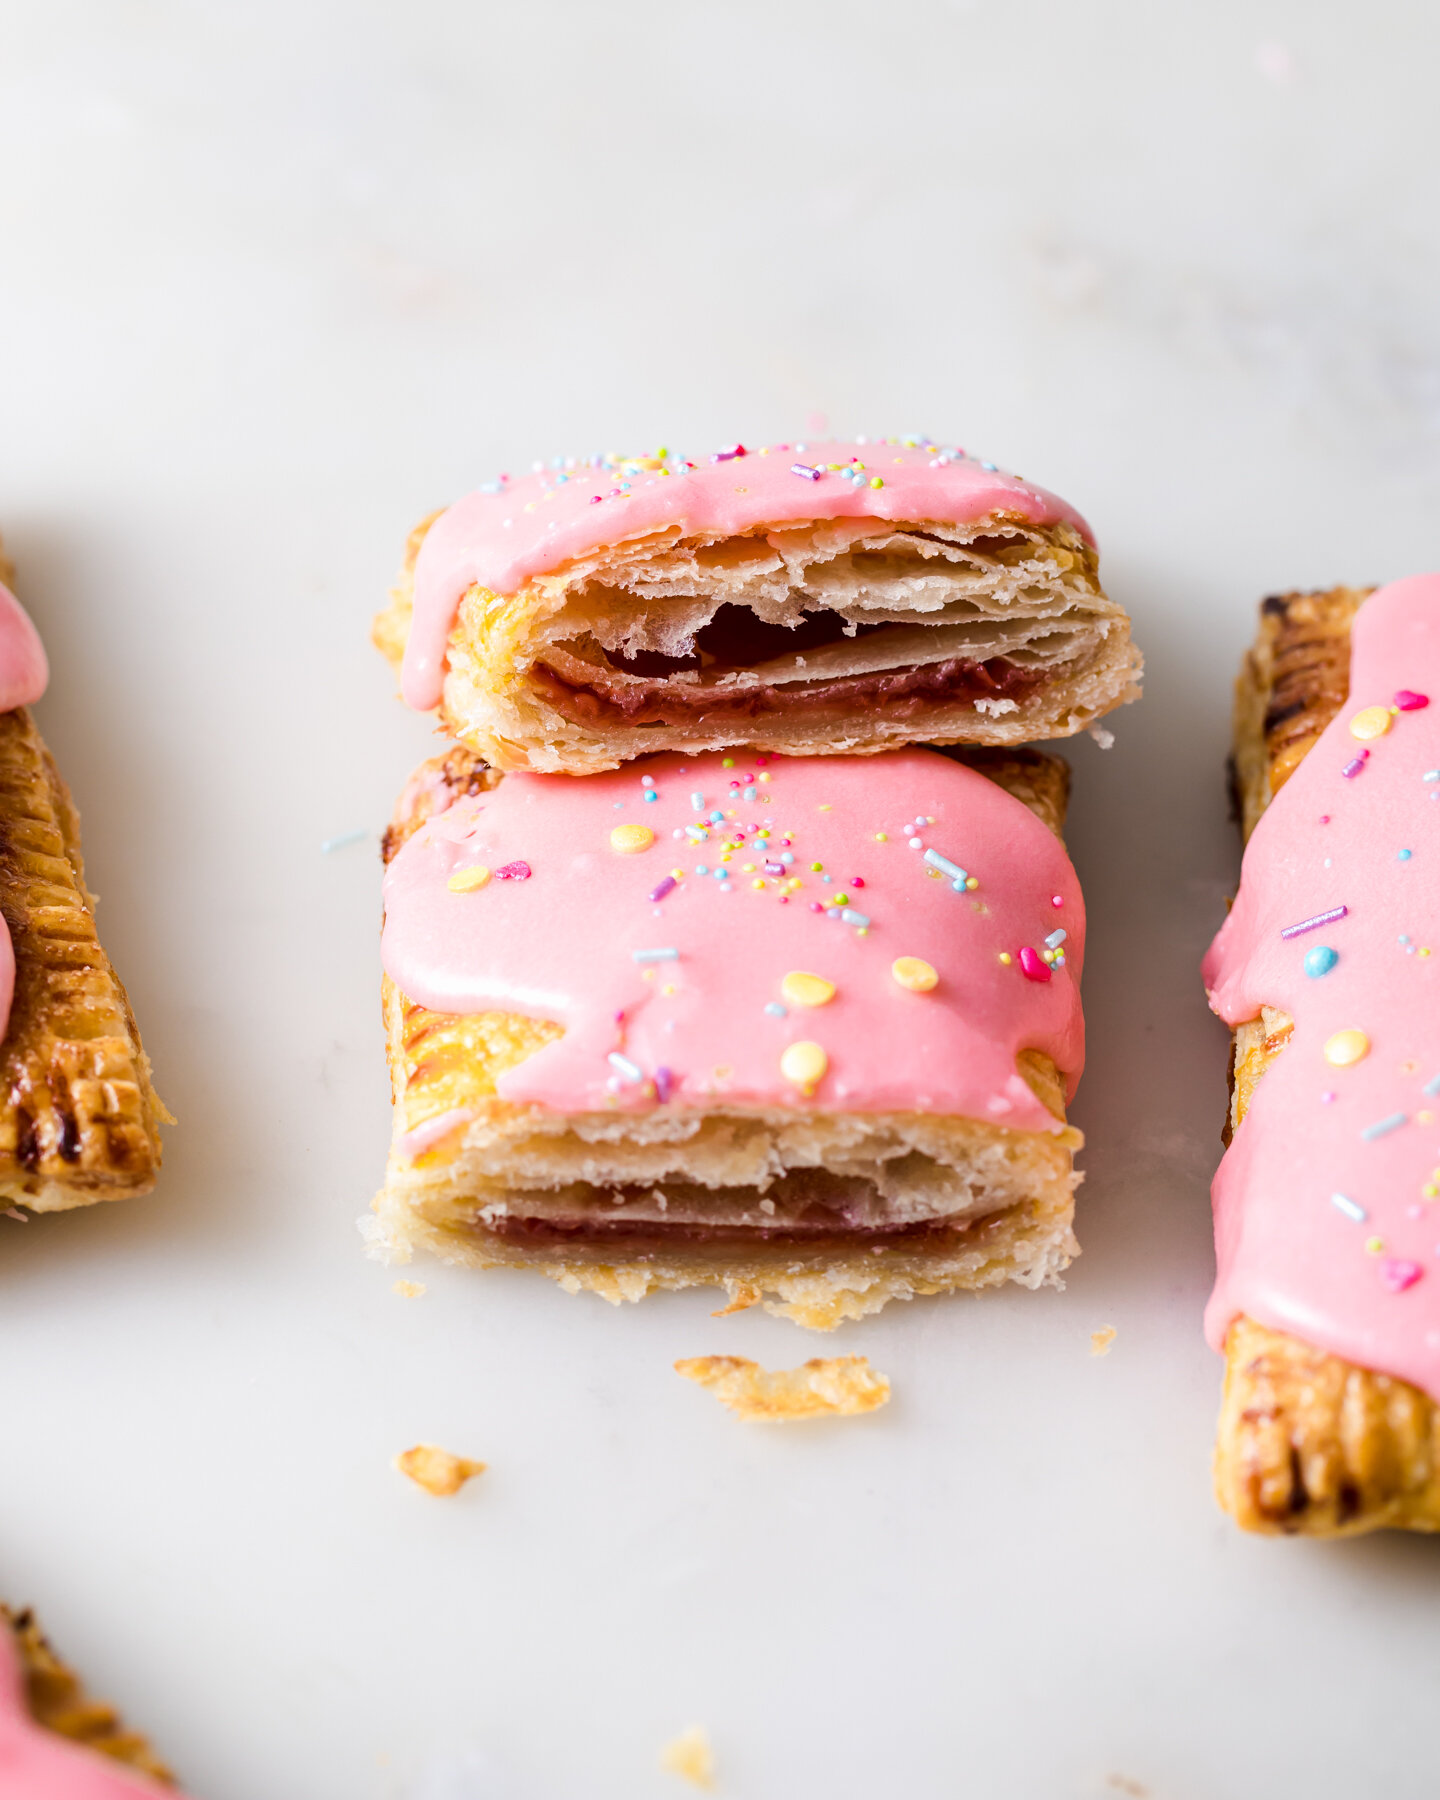 An inside look at the flaky layers  and strawberry jam filling of Homemade Strawberry Pop Tarts